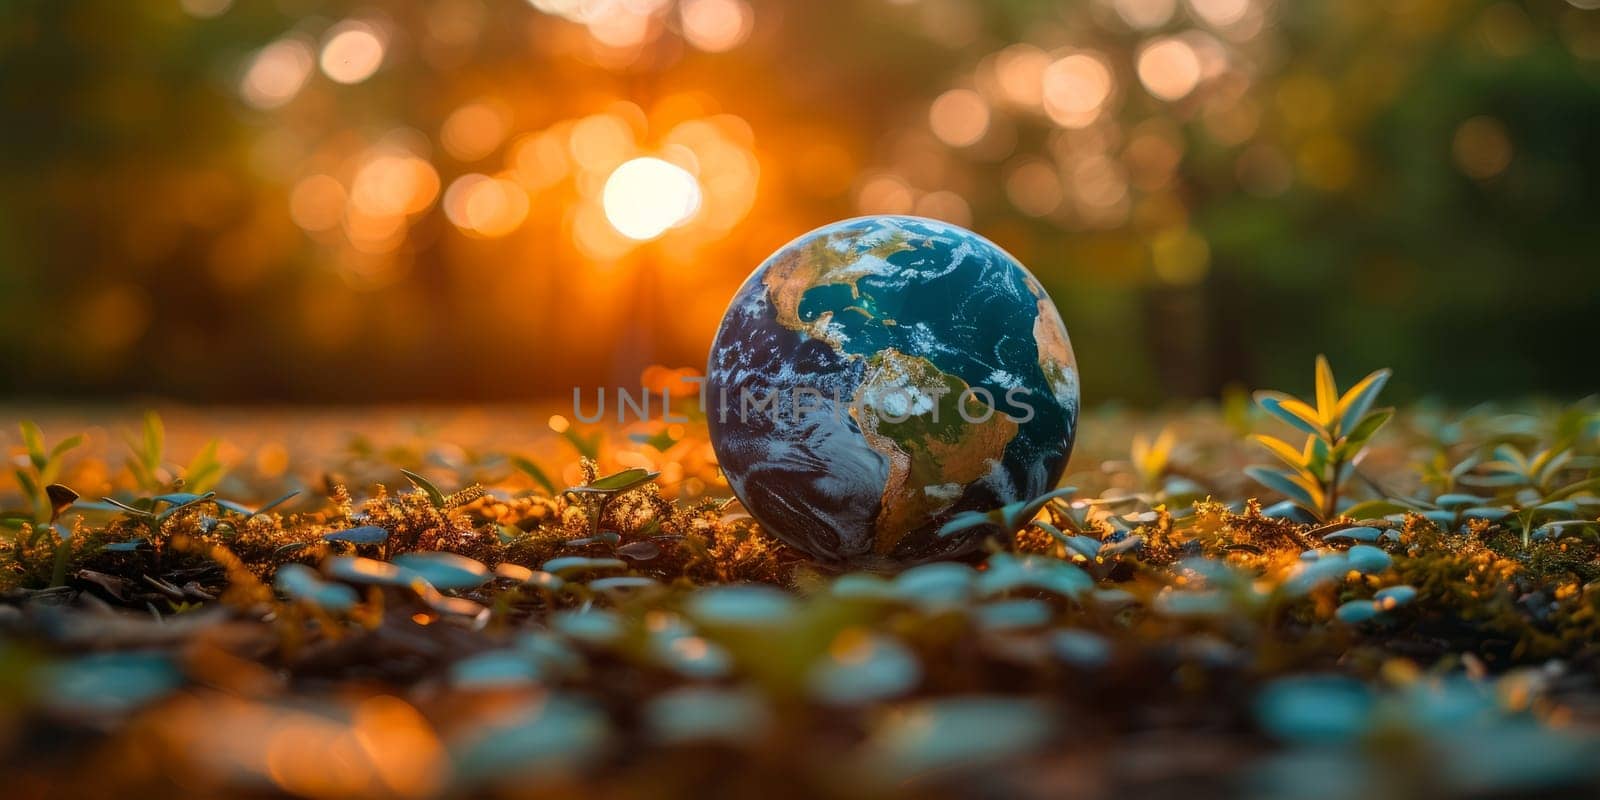 Earth globe on autumn leaves in nature with sunlight bokeh. Concept of environmental protection, ecology, sustainable living, and preserving the planet.